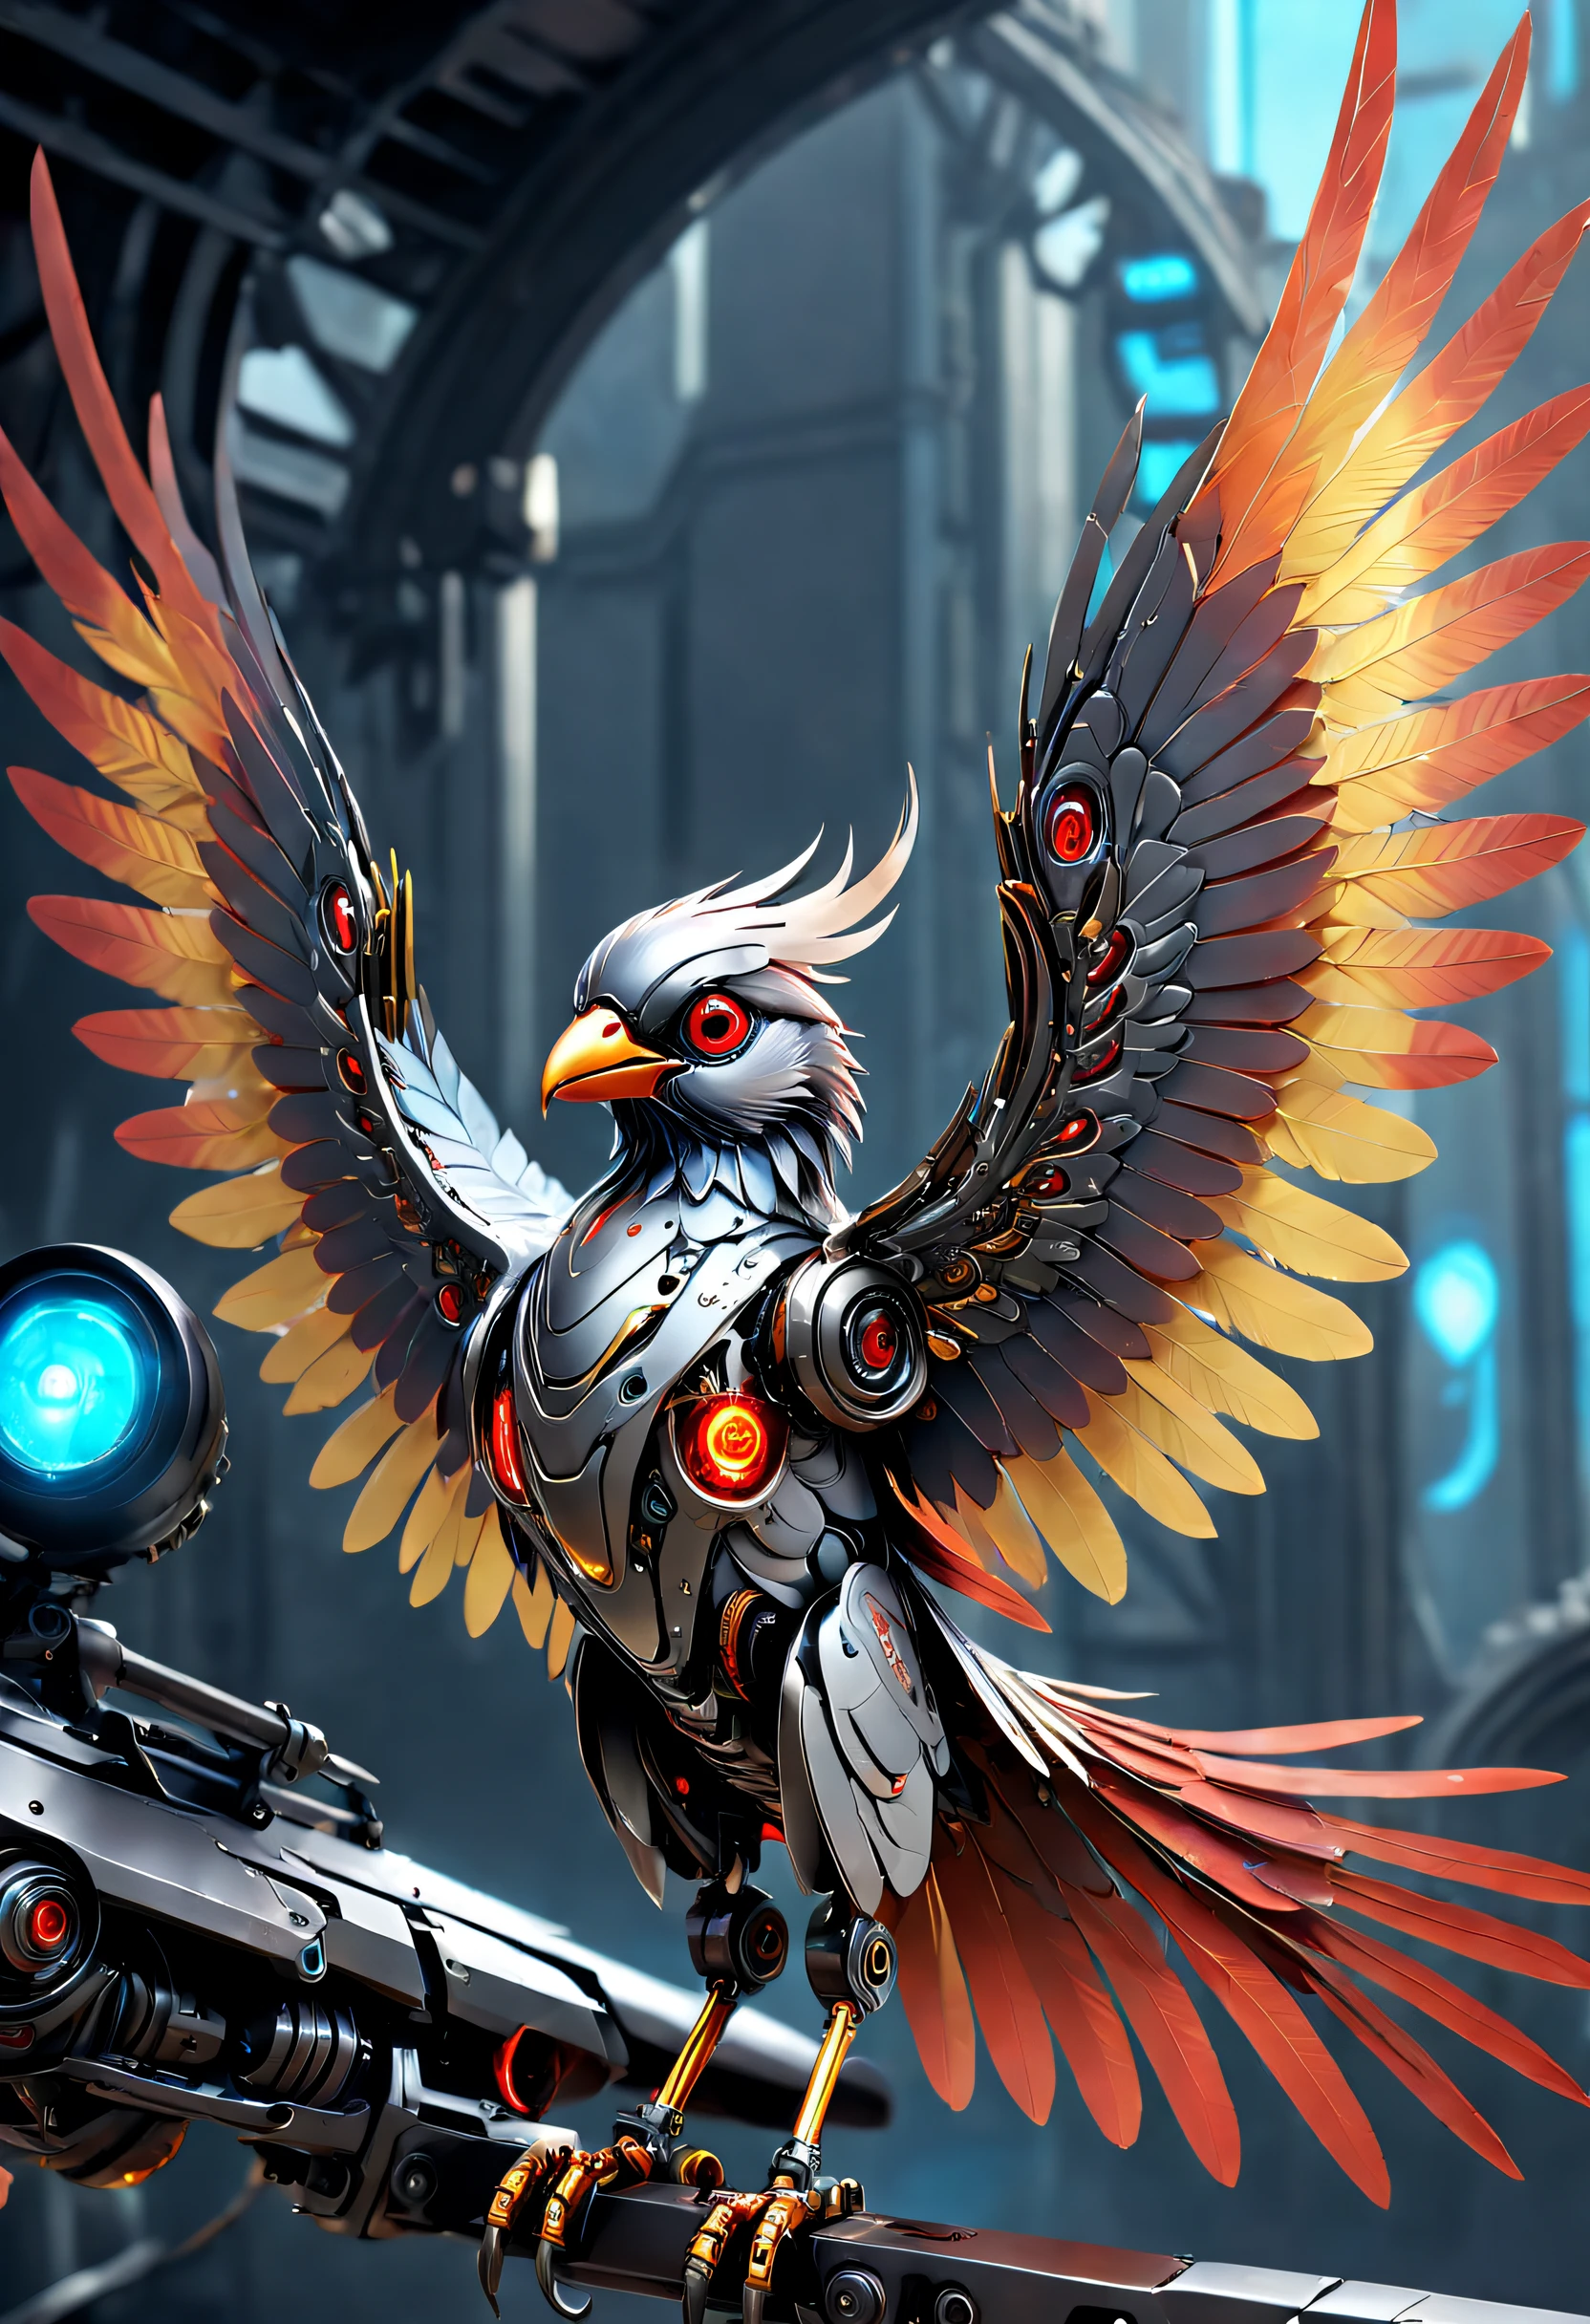 (Best quality,4K,8K,A high resolution,Masterpiece:1.2),Ultra-detailed,Realistic,Mechanical birds,Detailed mechanical wing,Metal feathers,Glowing red eyes,Precise and complex design,Collapsible mechanical wing,Ultra-fine texture,Mechanical beak,Shiny steel body,hovers in mid-air,High-tech robotic bird,Artistic rendering,Vibrant colors,Sharp focus,Dynamic lighting effects,futuristic concept art